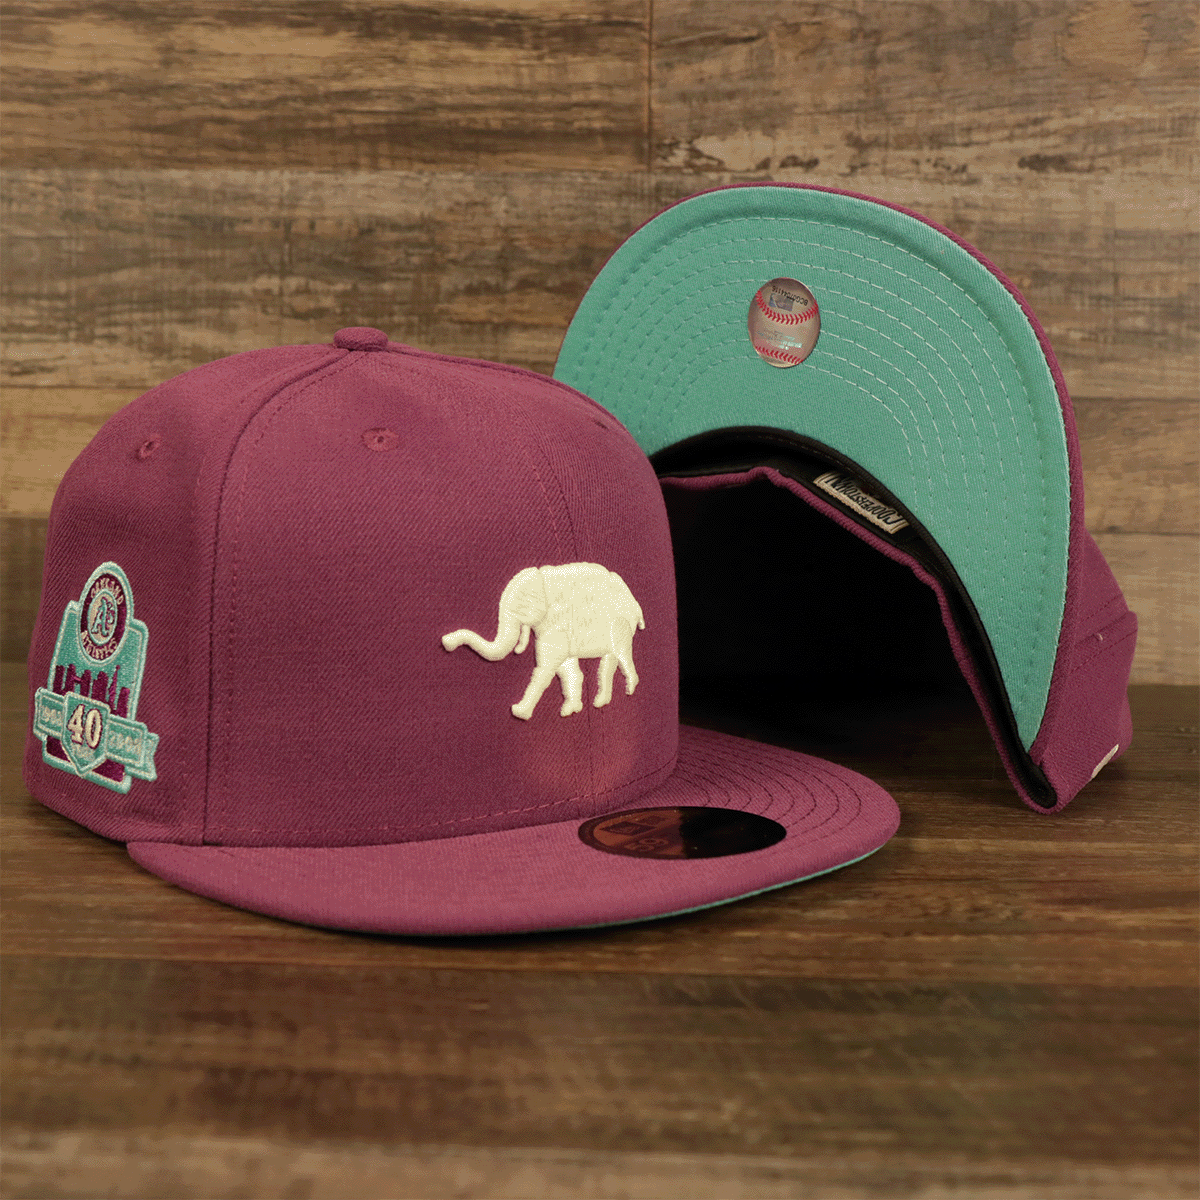 Philadelphia Athletics Glow In The Dark Oakland 40 Year Patch Teal Bottom Side Patch 59Fifty Fitted Cap